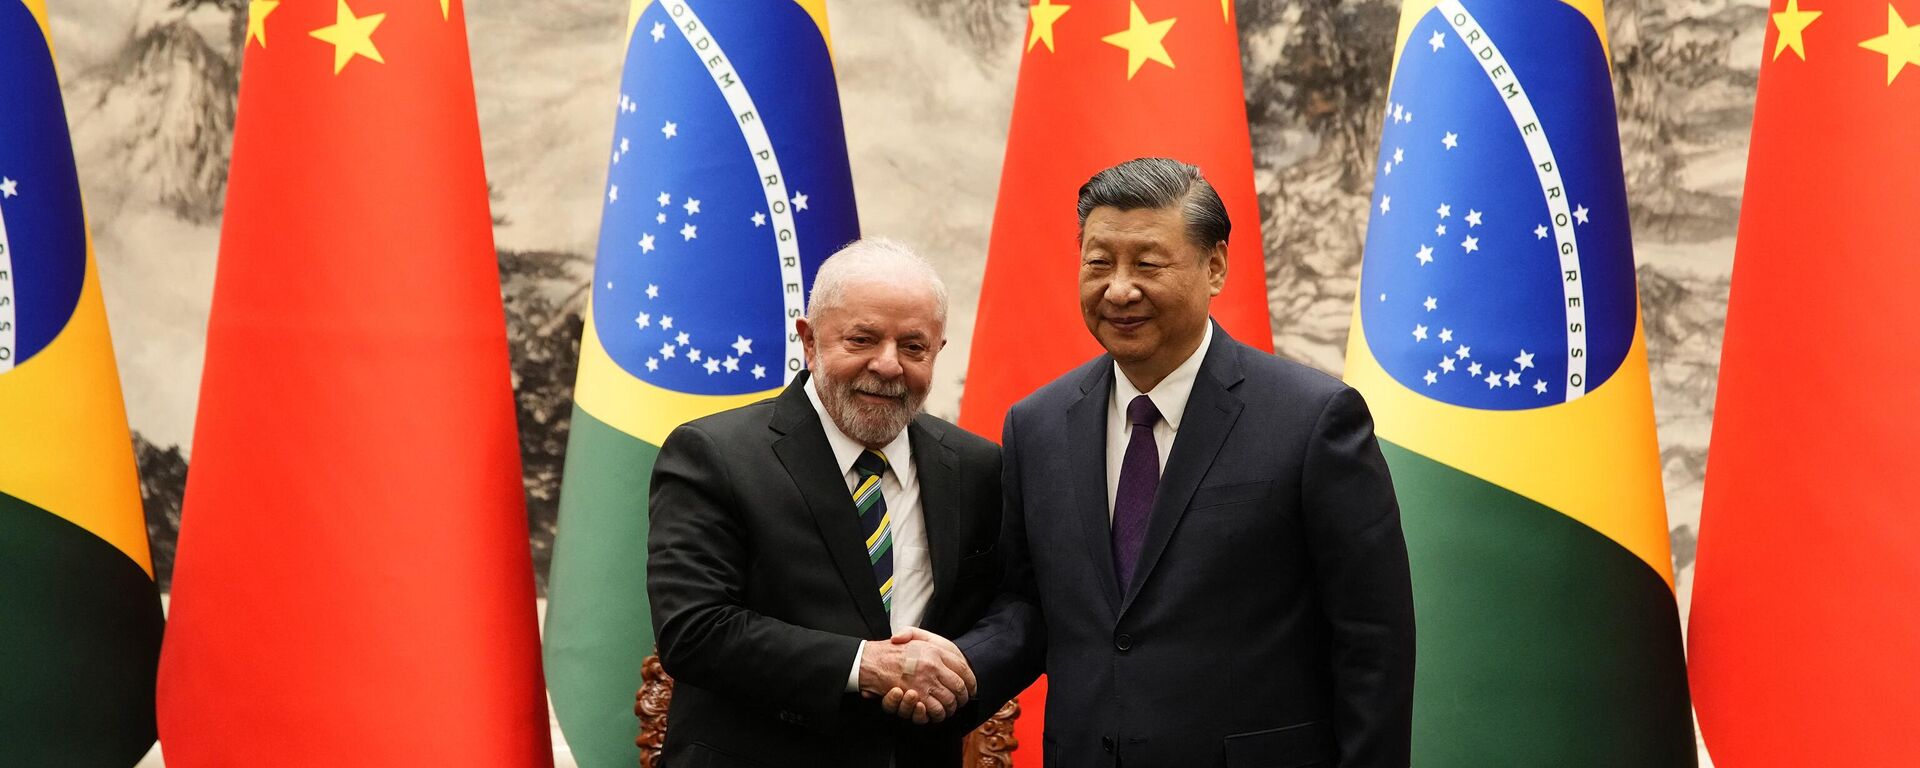 Chinese President Xi Jinping (R) and Brazil's President Luiz Inacio Lula da Silva shake hands after a signing ceremony at the Great Hall of the People in Beijing on April 14, 2023 - Sputnik International, 1920, 14.04.2023